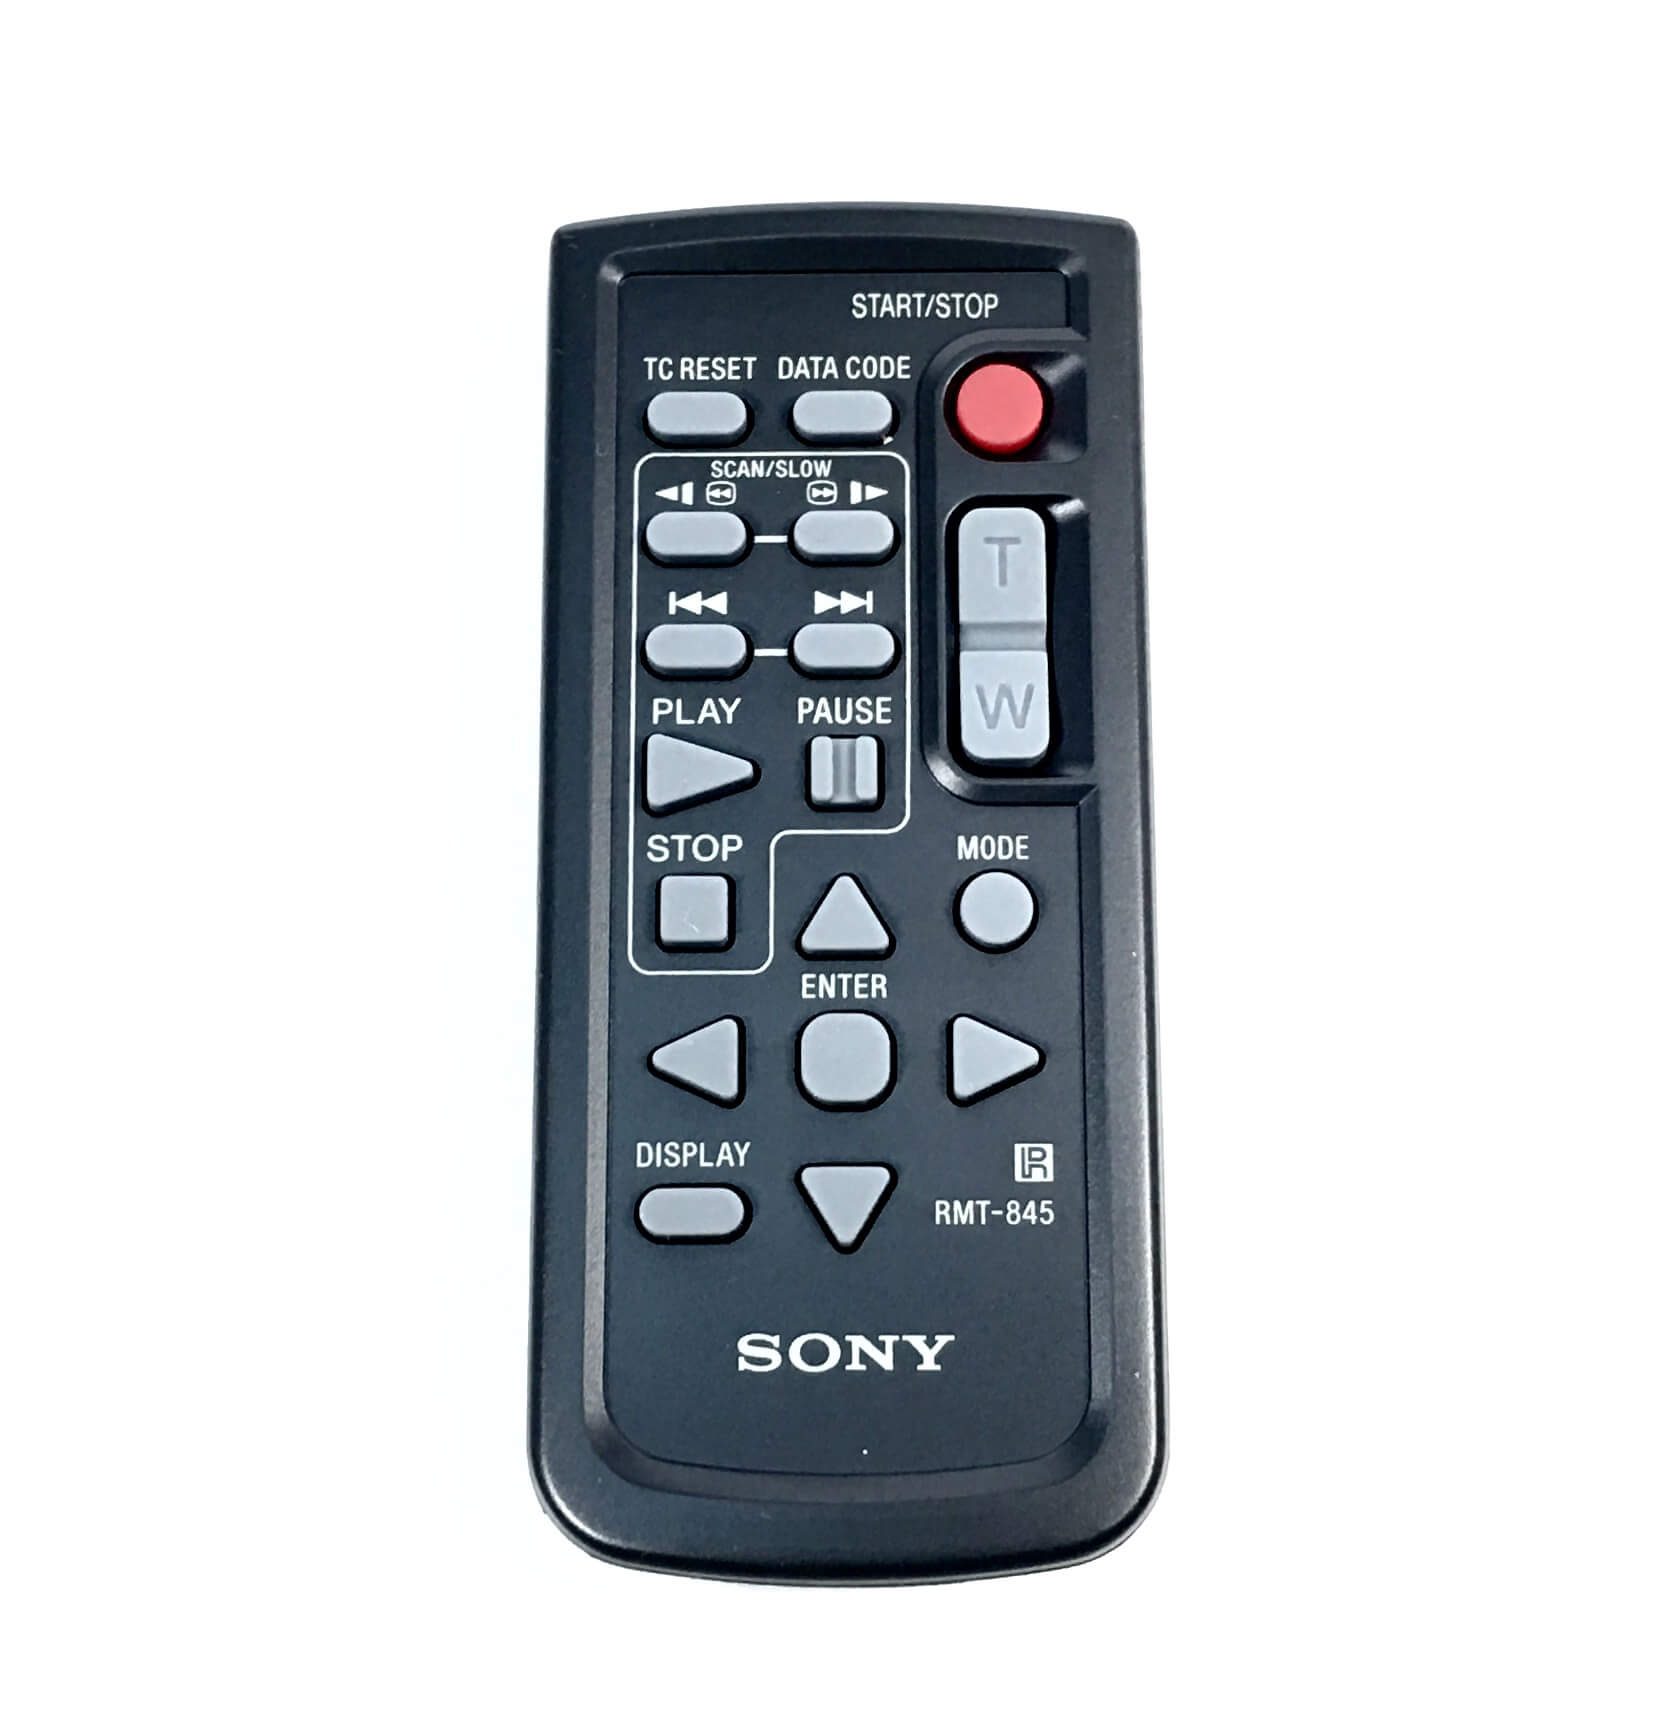 Original wireless remote control that came with the Sony HDR-AX2000 camcorder. It is a genuine Sony part, sourced directly from Sony USA. Brand new factory fresh. Free Shipping.